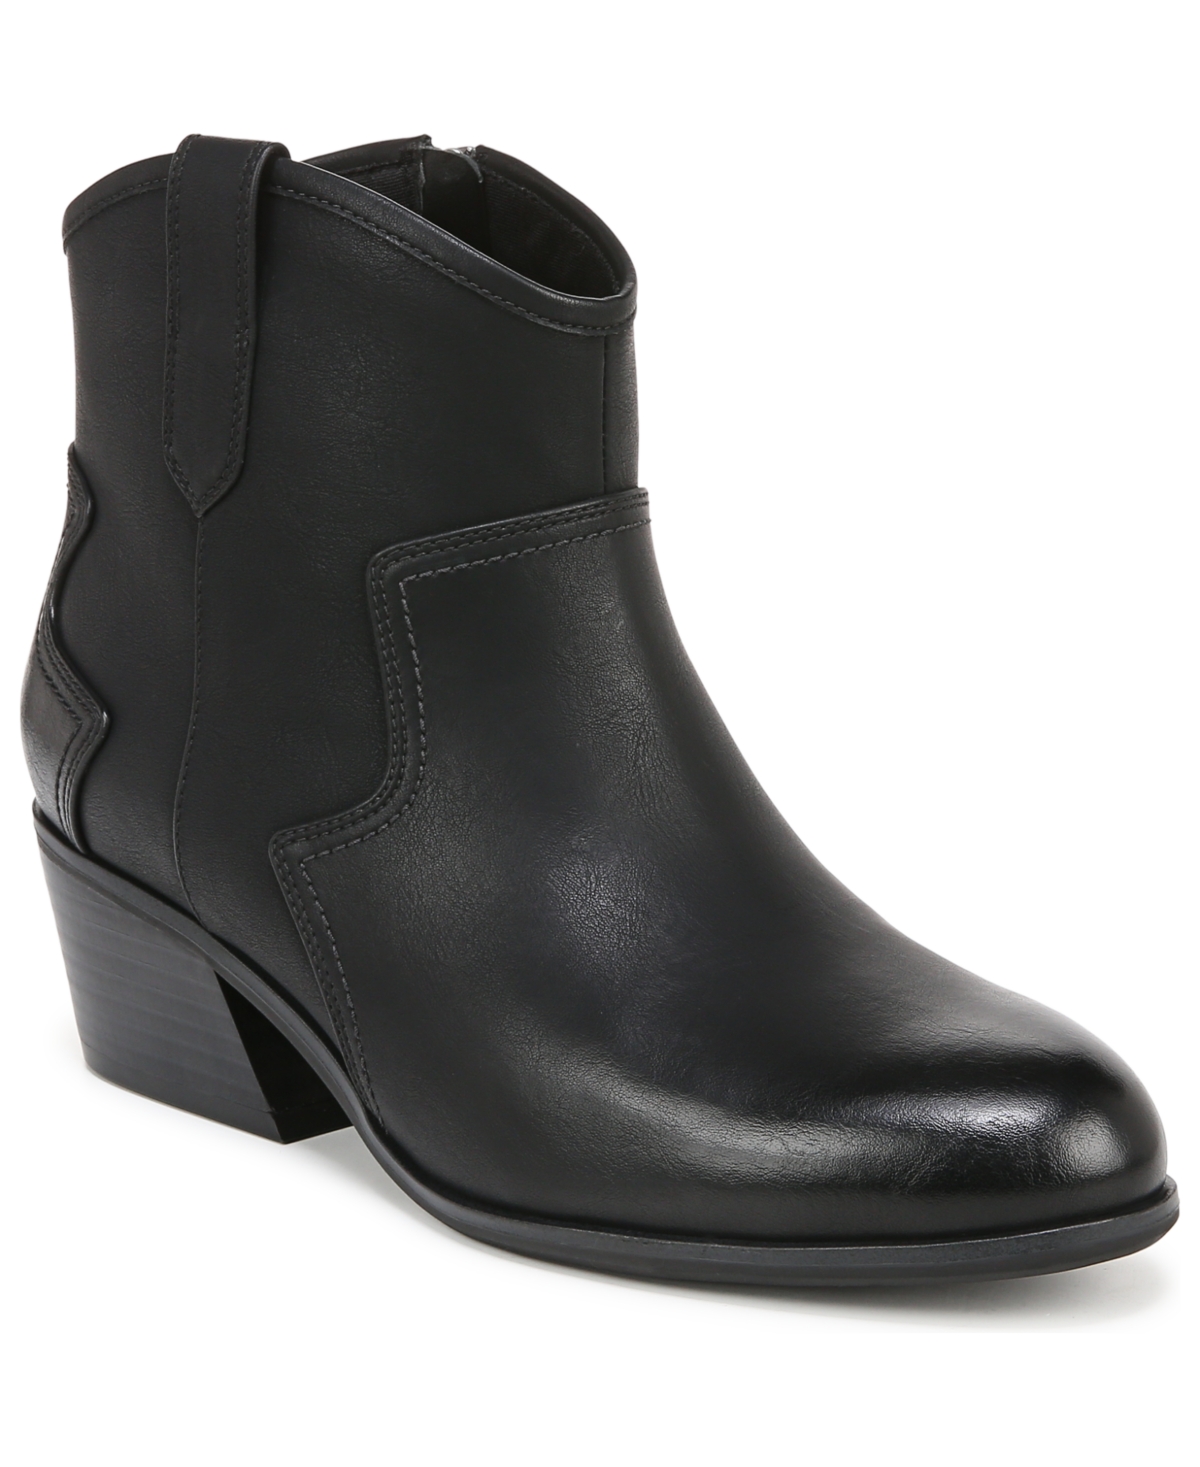 Women's Lasso Western Booties - Black/Off White Faux Leather